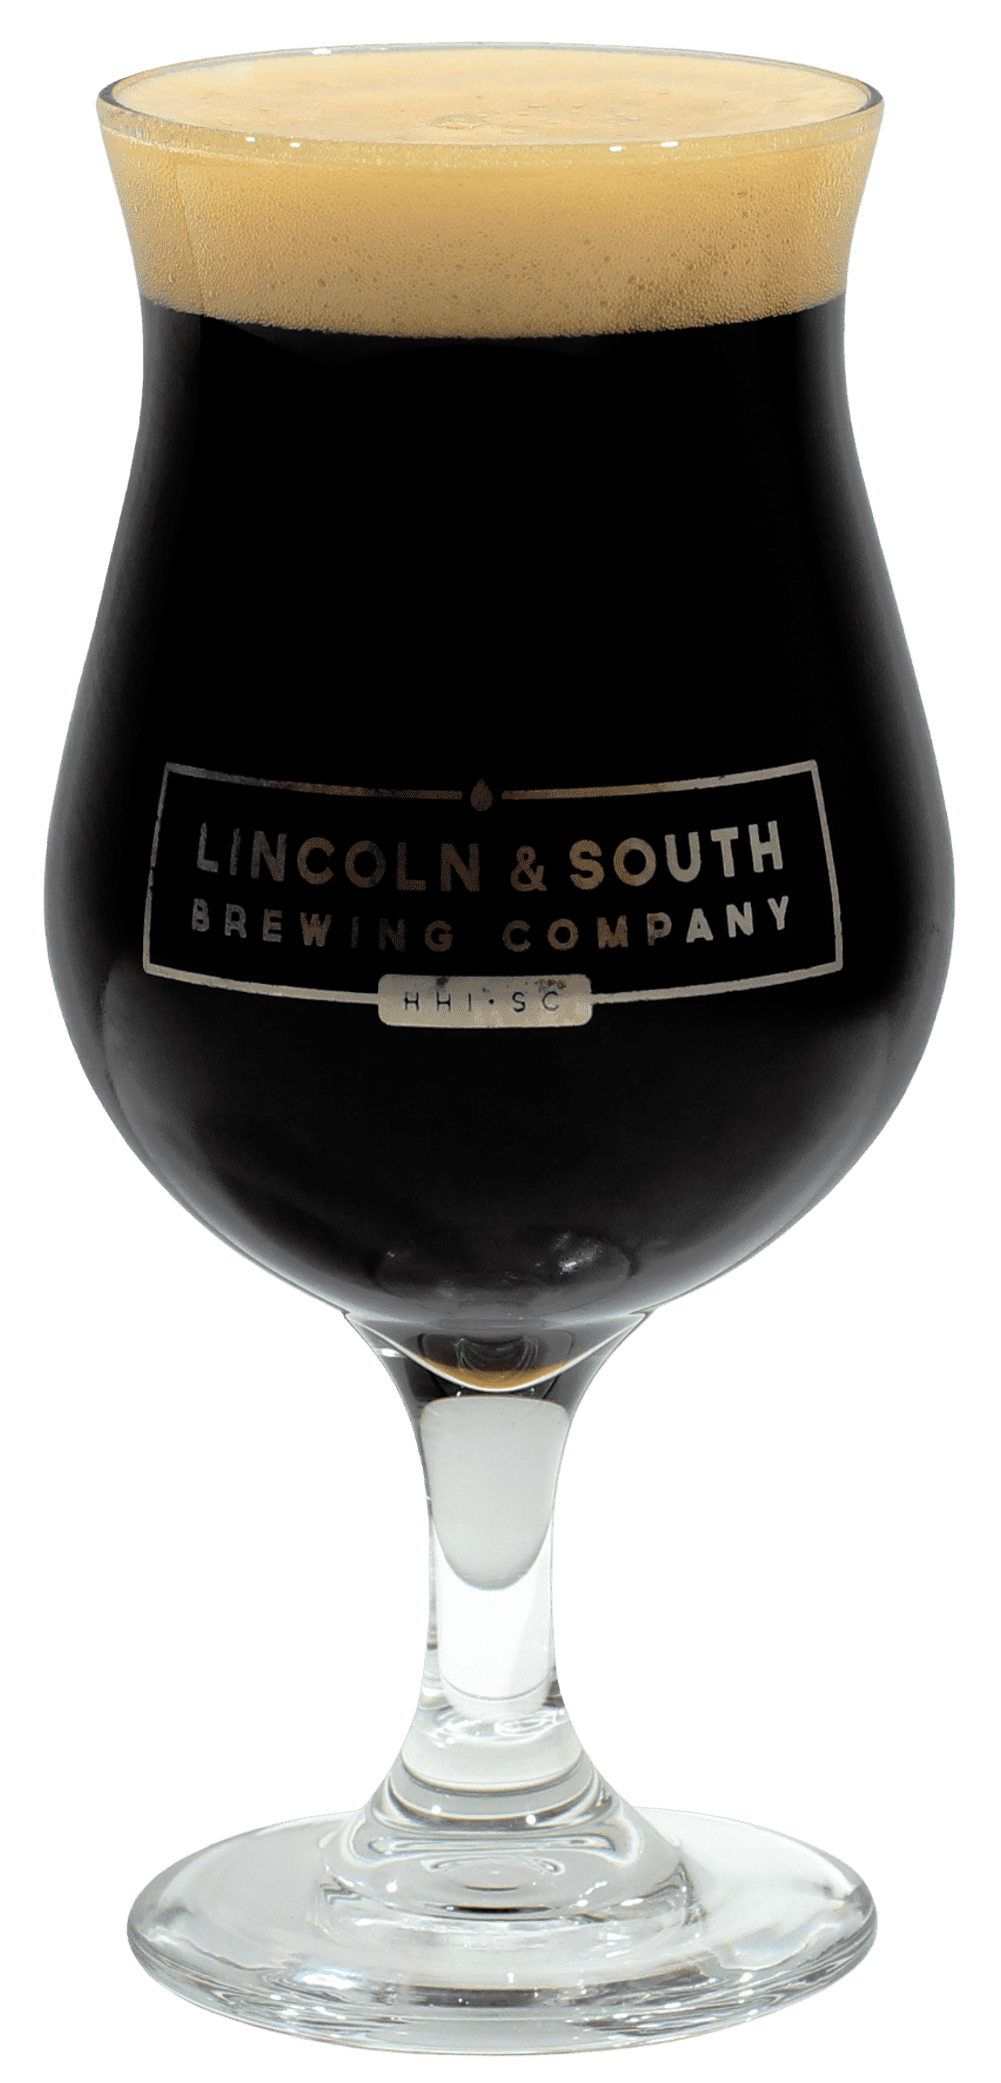 Hunker Down is an Imperial Stout offered by Lincoln & South Brewing Company on Hilton Head Island, SC